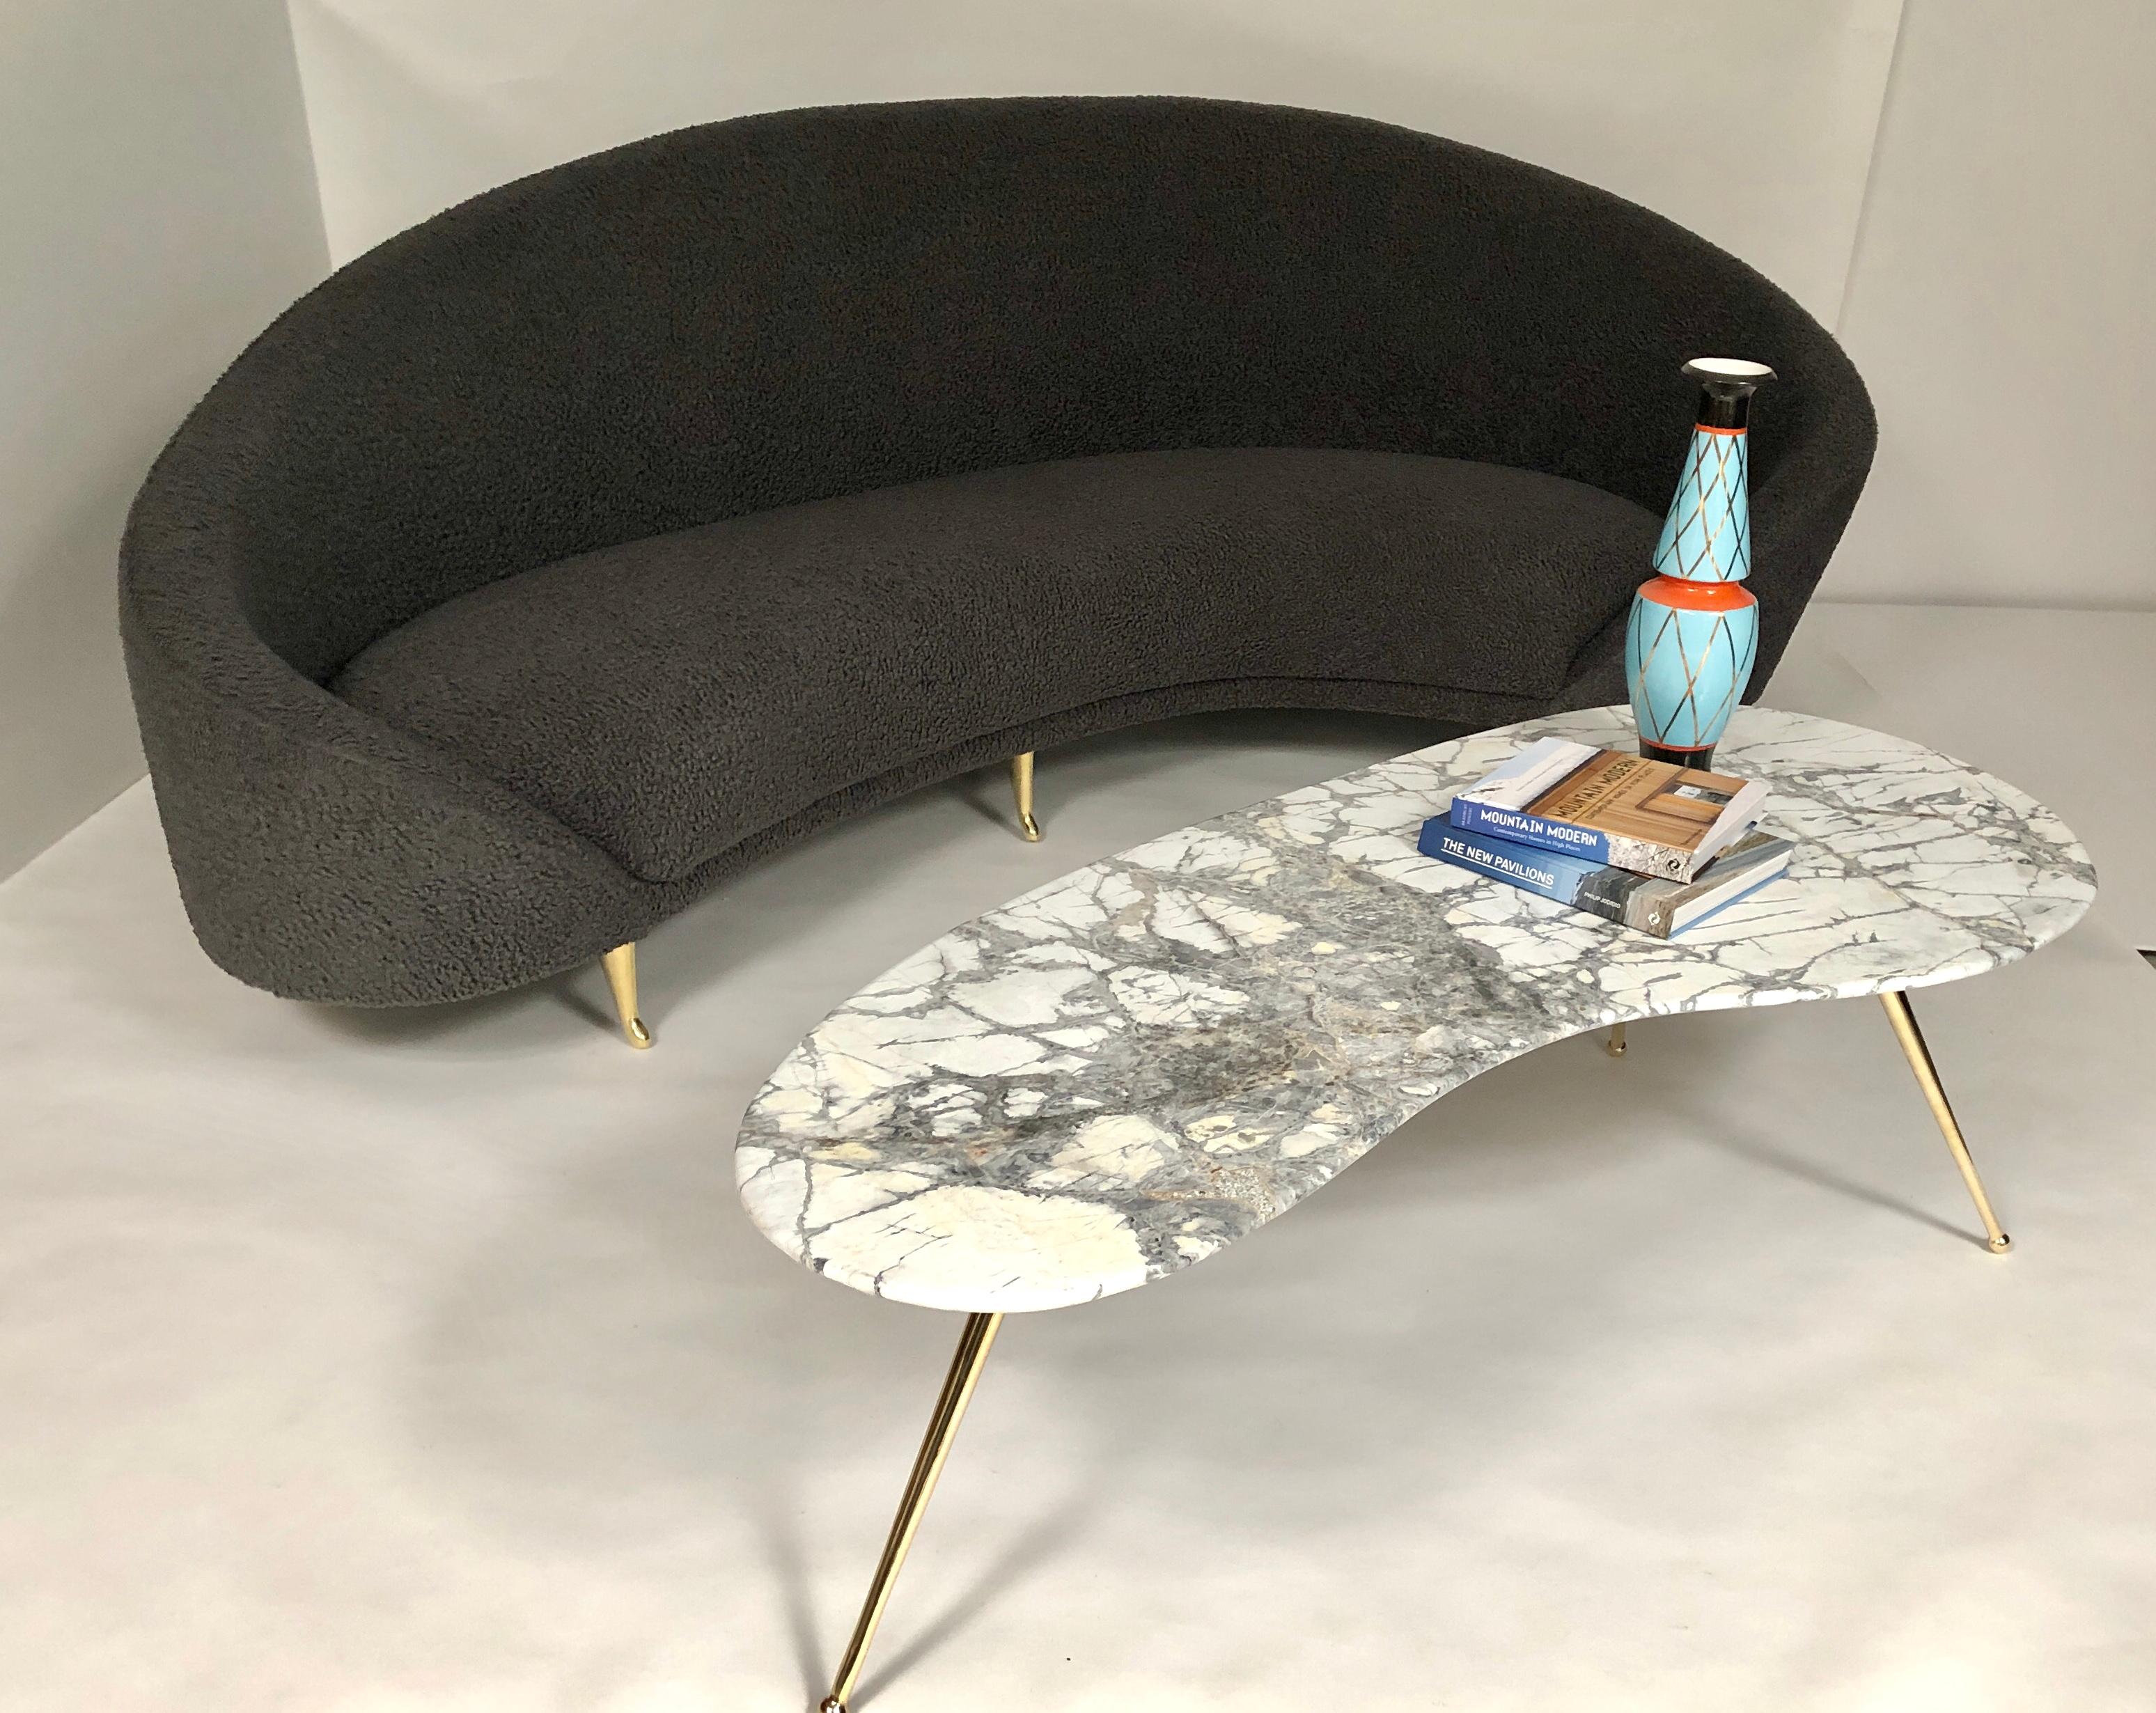 This chic sofa, reminiscent of the 1960’s, has elegant lines with gracious curves. The brass feet add to its sophistication with their delicate design. It will be the focal
point of any room. The kidney shape of the sofa provides plenty of